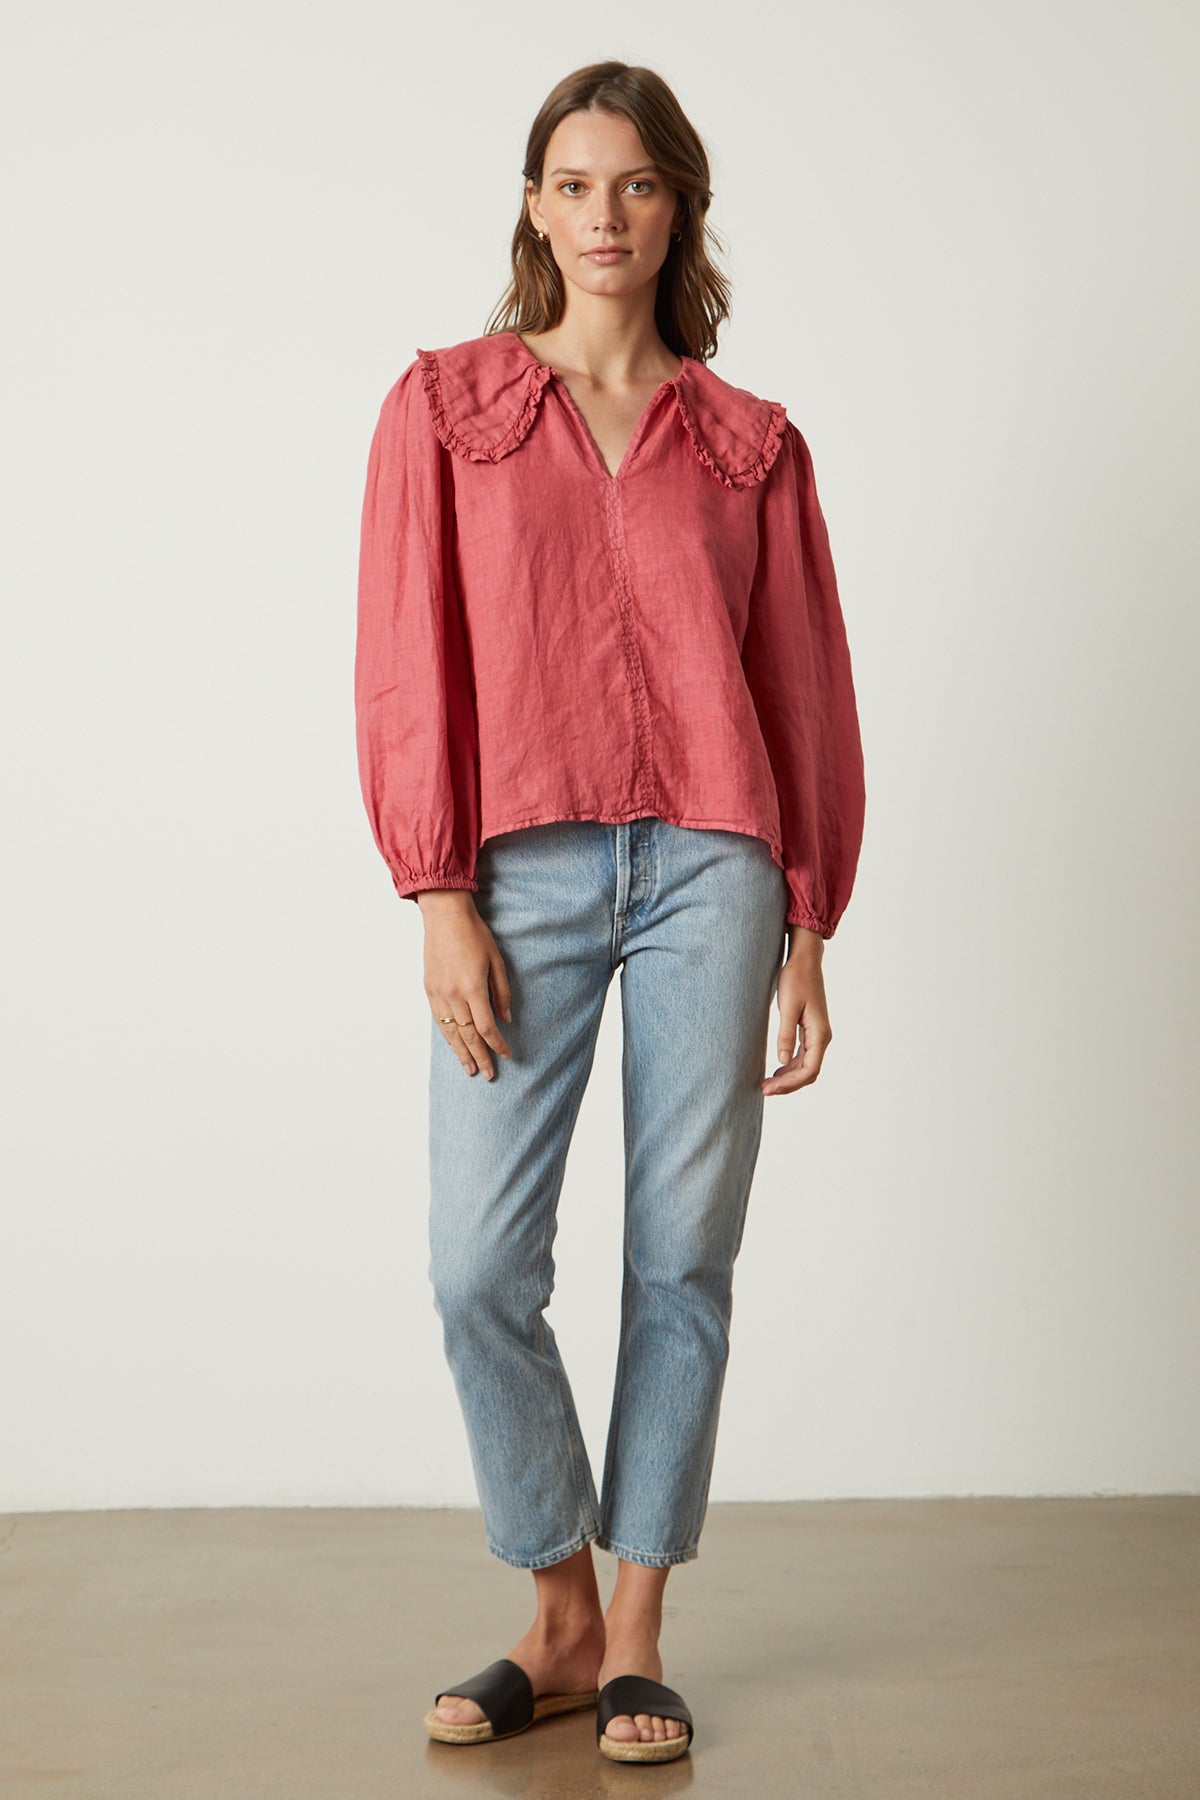 Sofia linen top in punch with light blue denim and black slides full length front-26079070486721